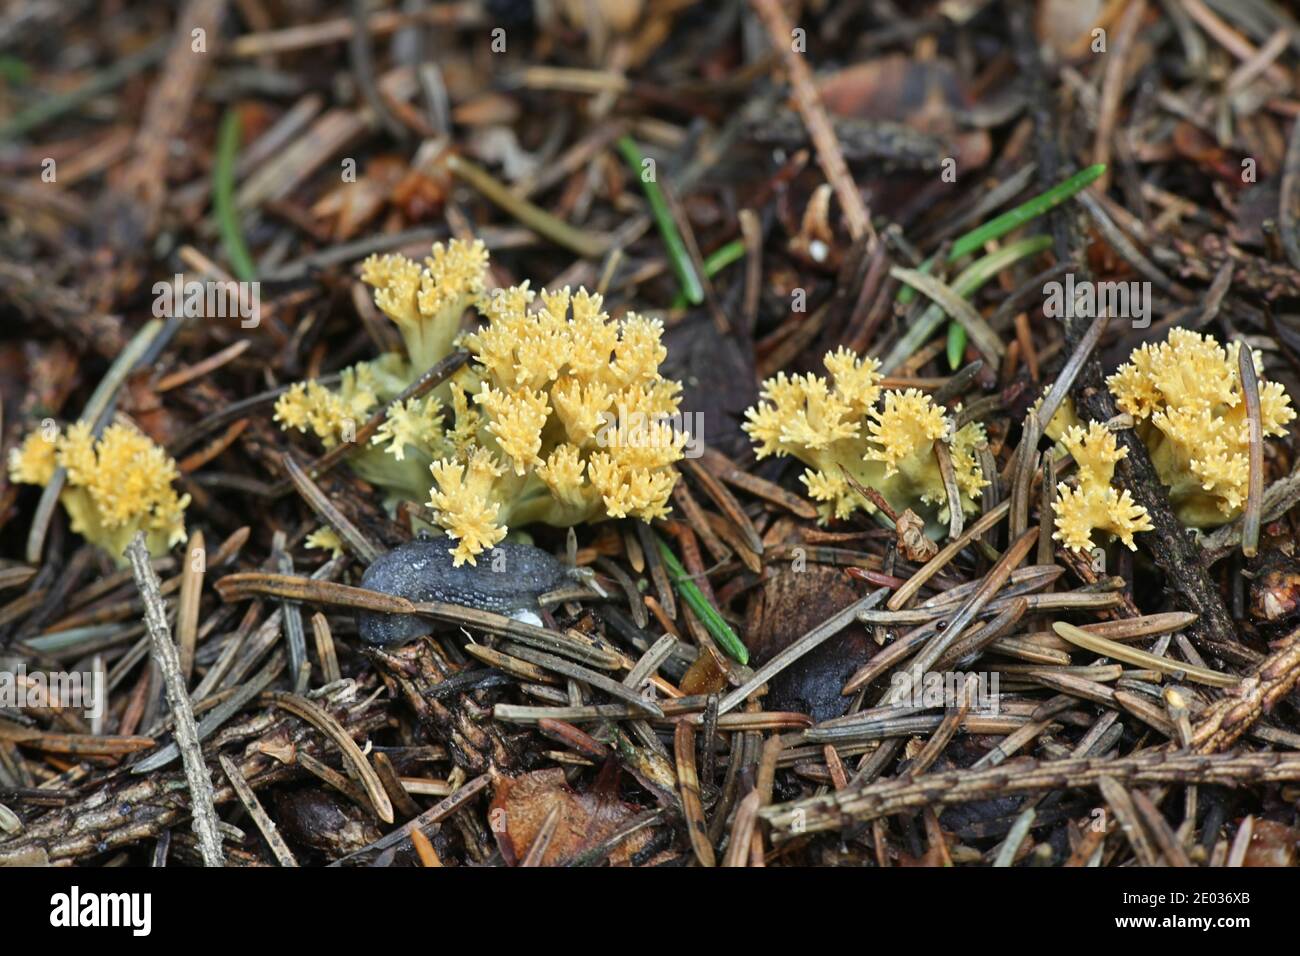 Ramaria abietina, also konown as Phaeoclavulina abietina, the green-staining coral or greening coral fungus, wild mushroom from Finland Stock Photo